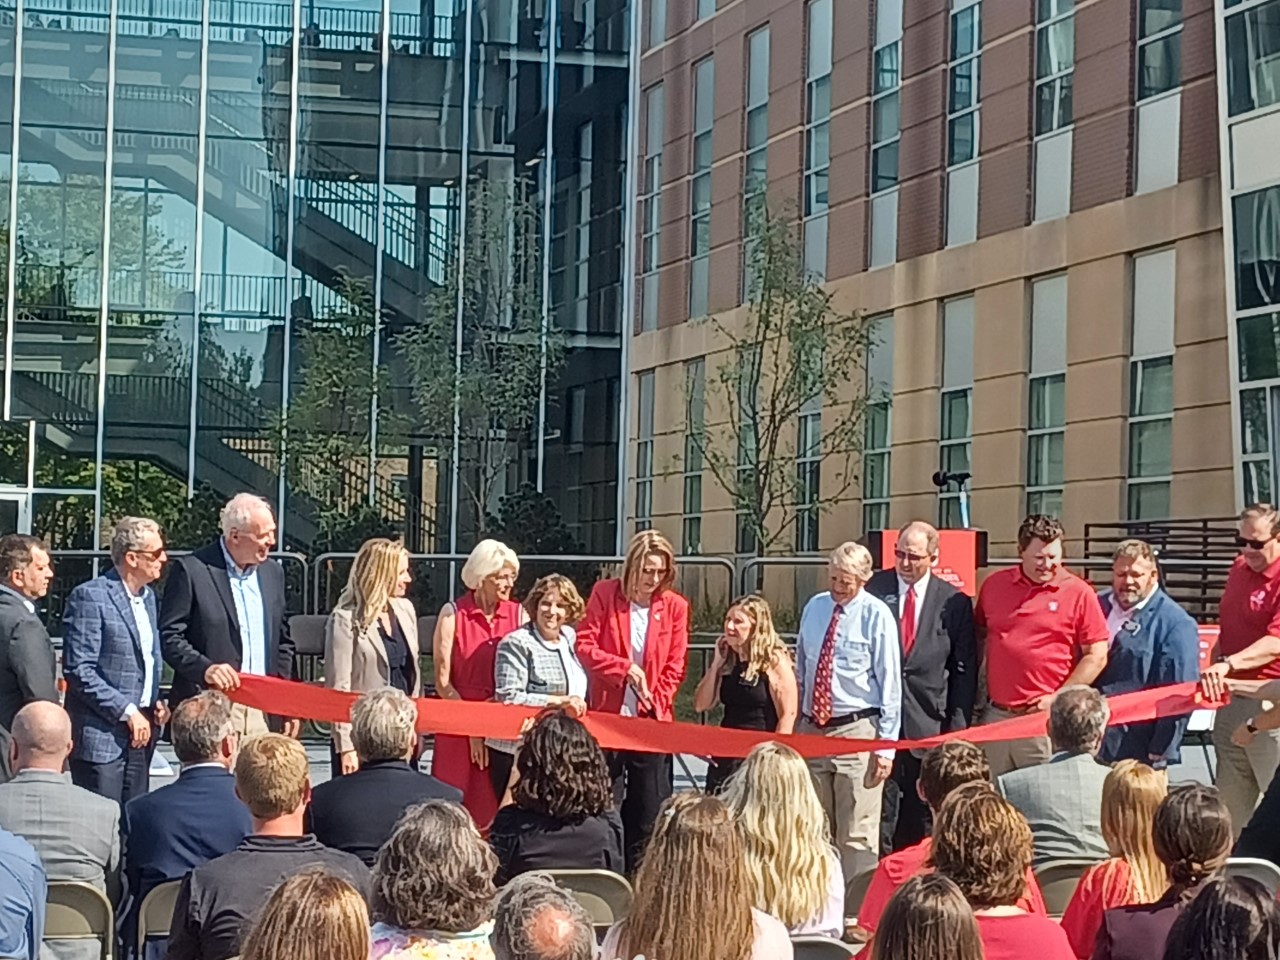 USD Hosts Grand Opening for Health Sciences Building